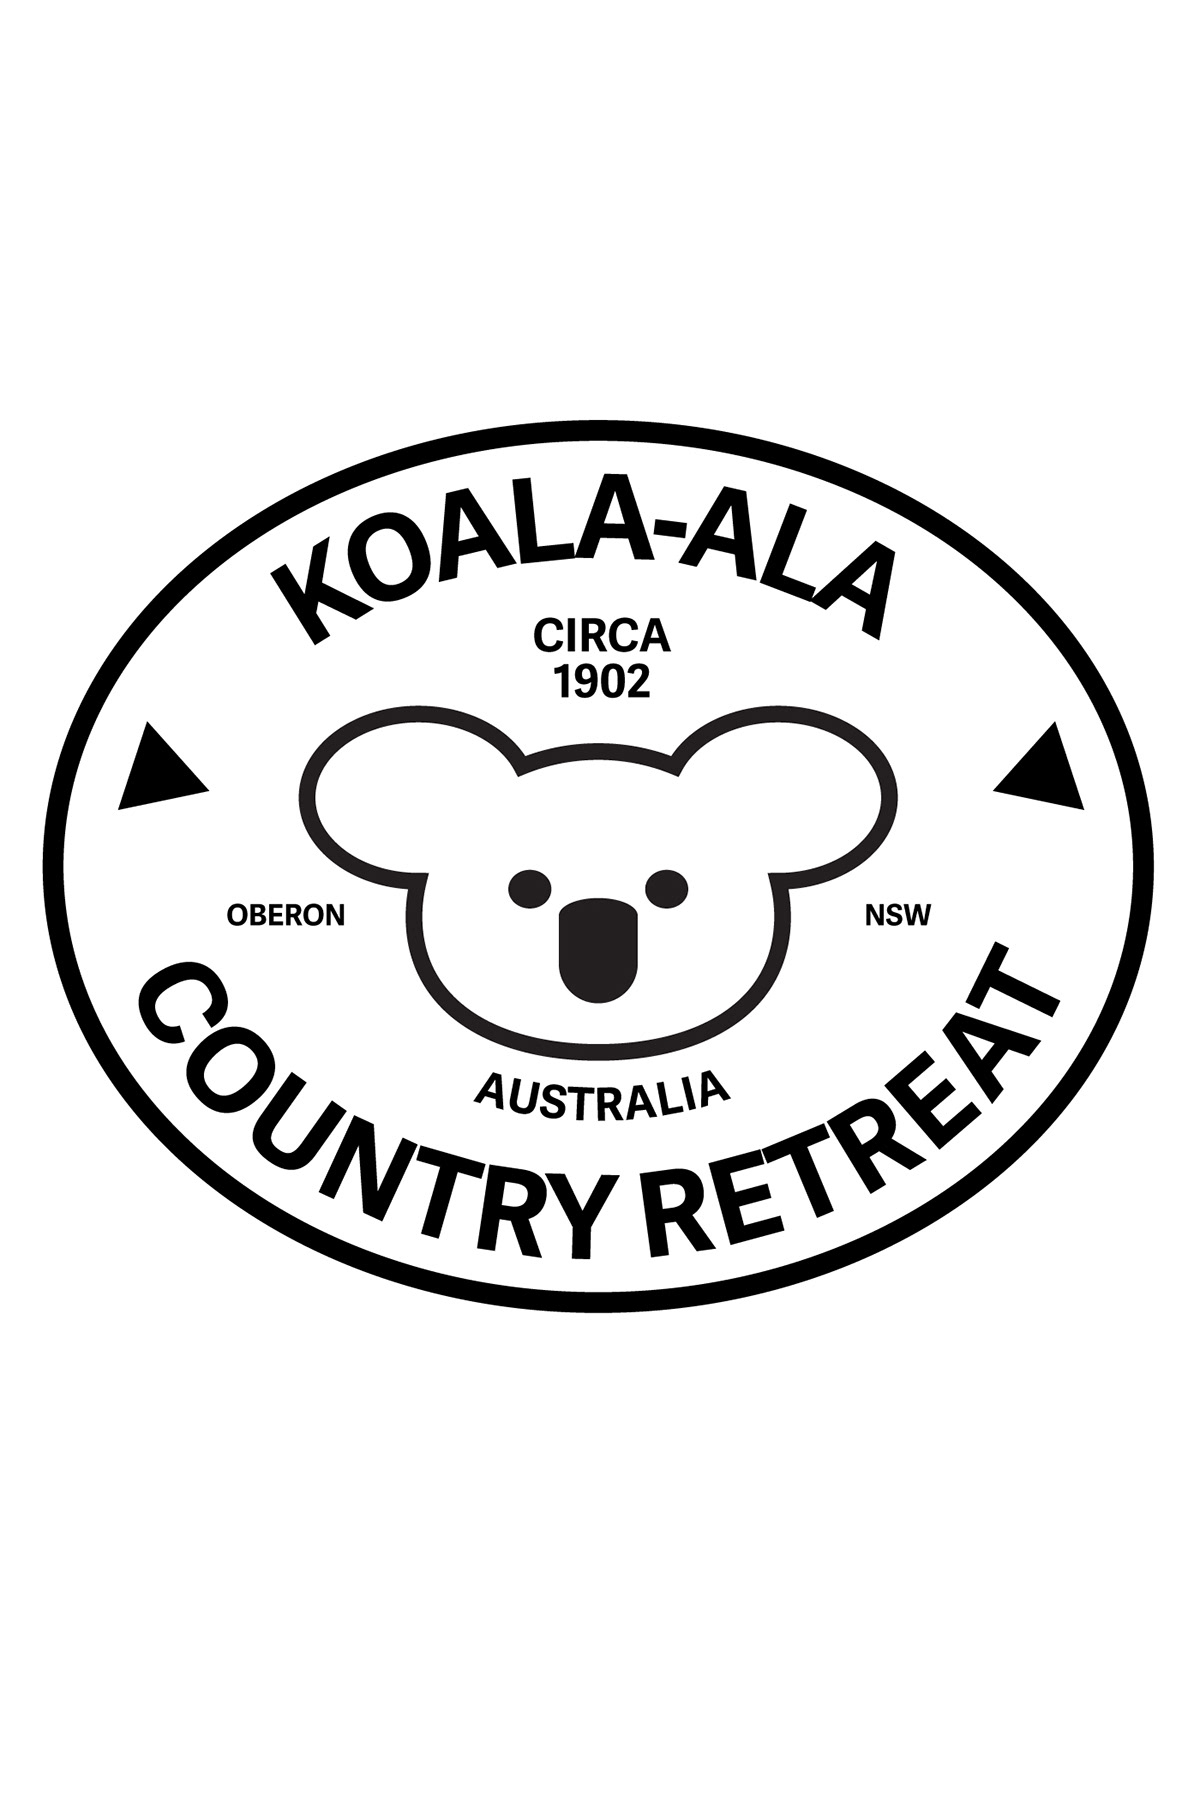 Image of koala in bad with type on a path.